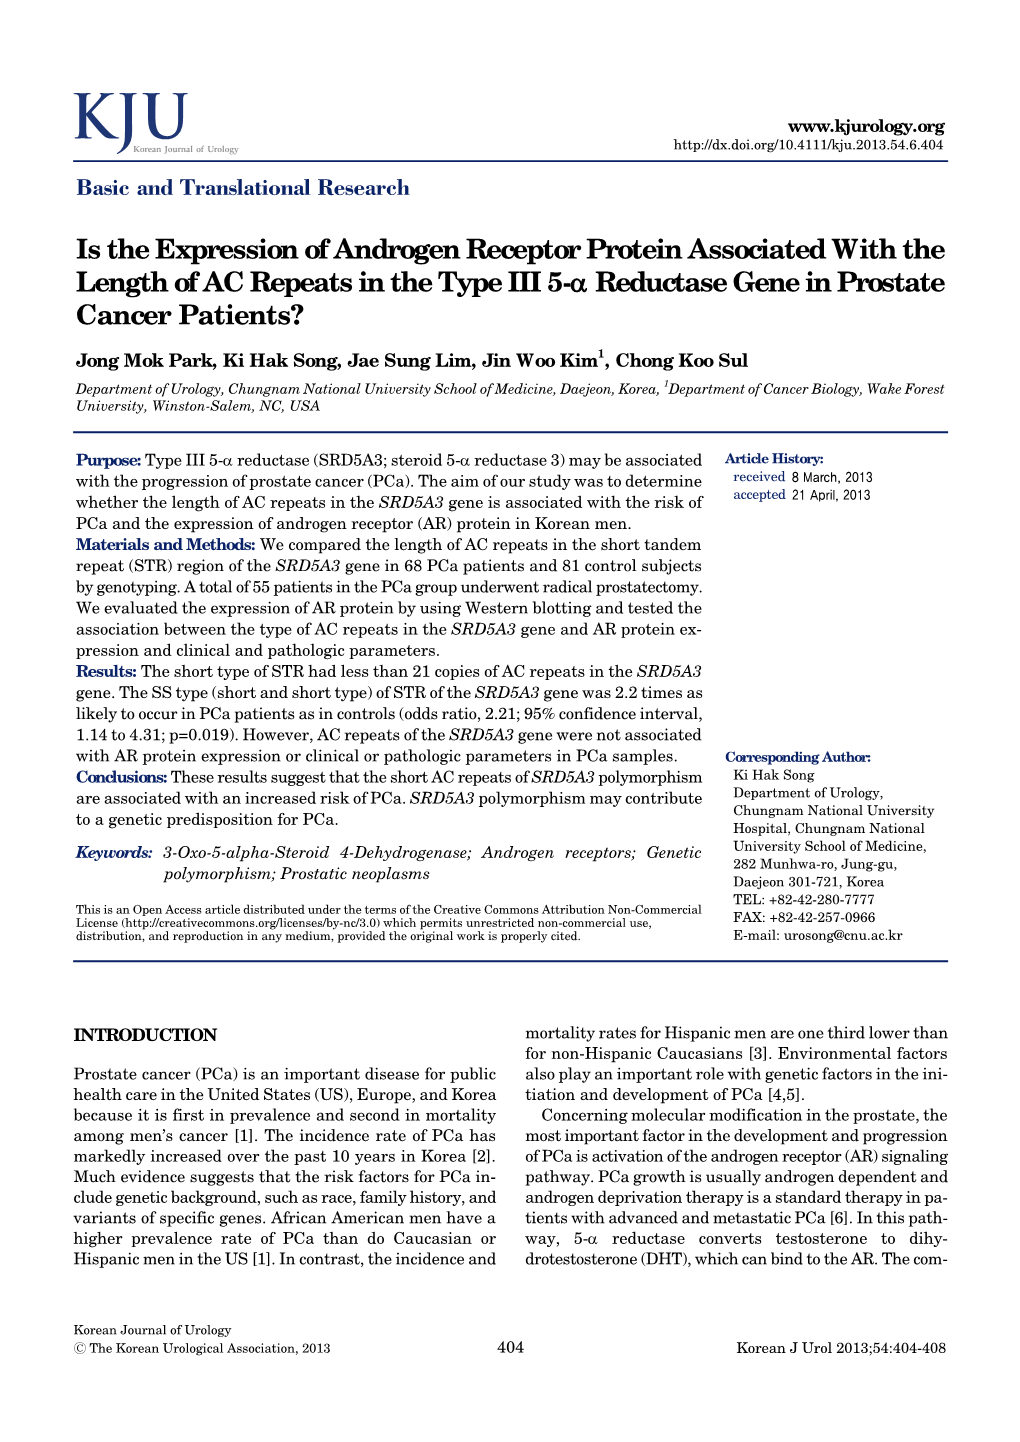 Is the Expression of Androgen Receptor Protein Associated with the Length of AC Repeats in the Type III 5-Α Reductase Gene in P